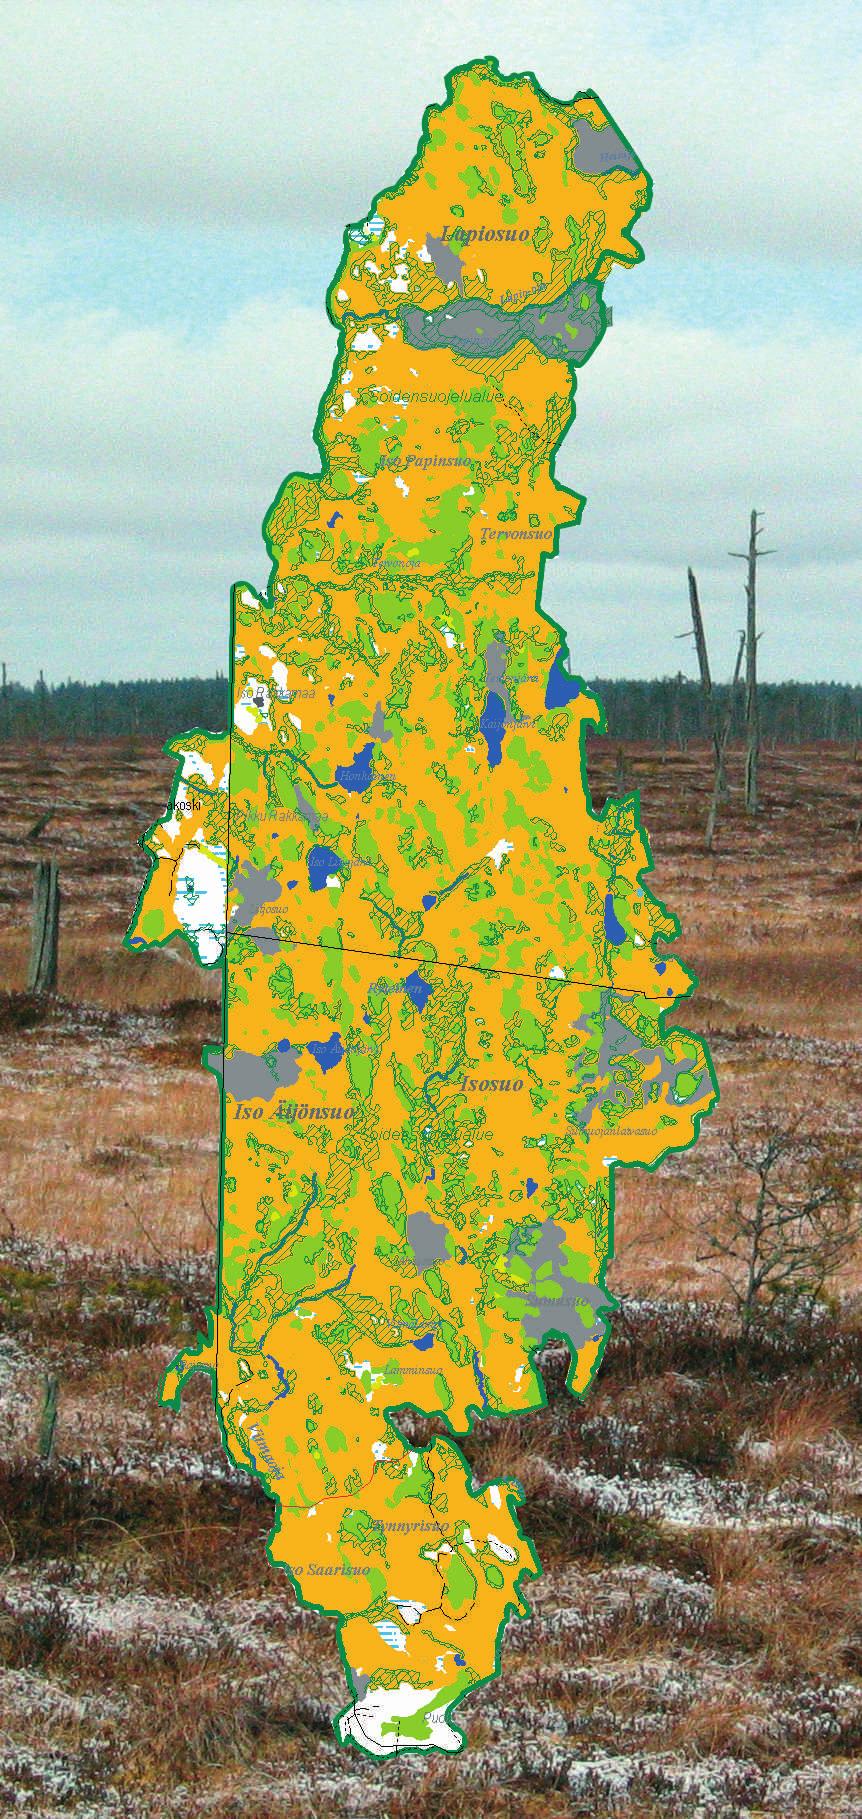 Photo: Metsähallitus MANAGEMENT AND LAND USE PLANS A management and land use plan is a long-term plan covering the forms of management and land use intended for the area in question and basic